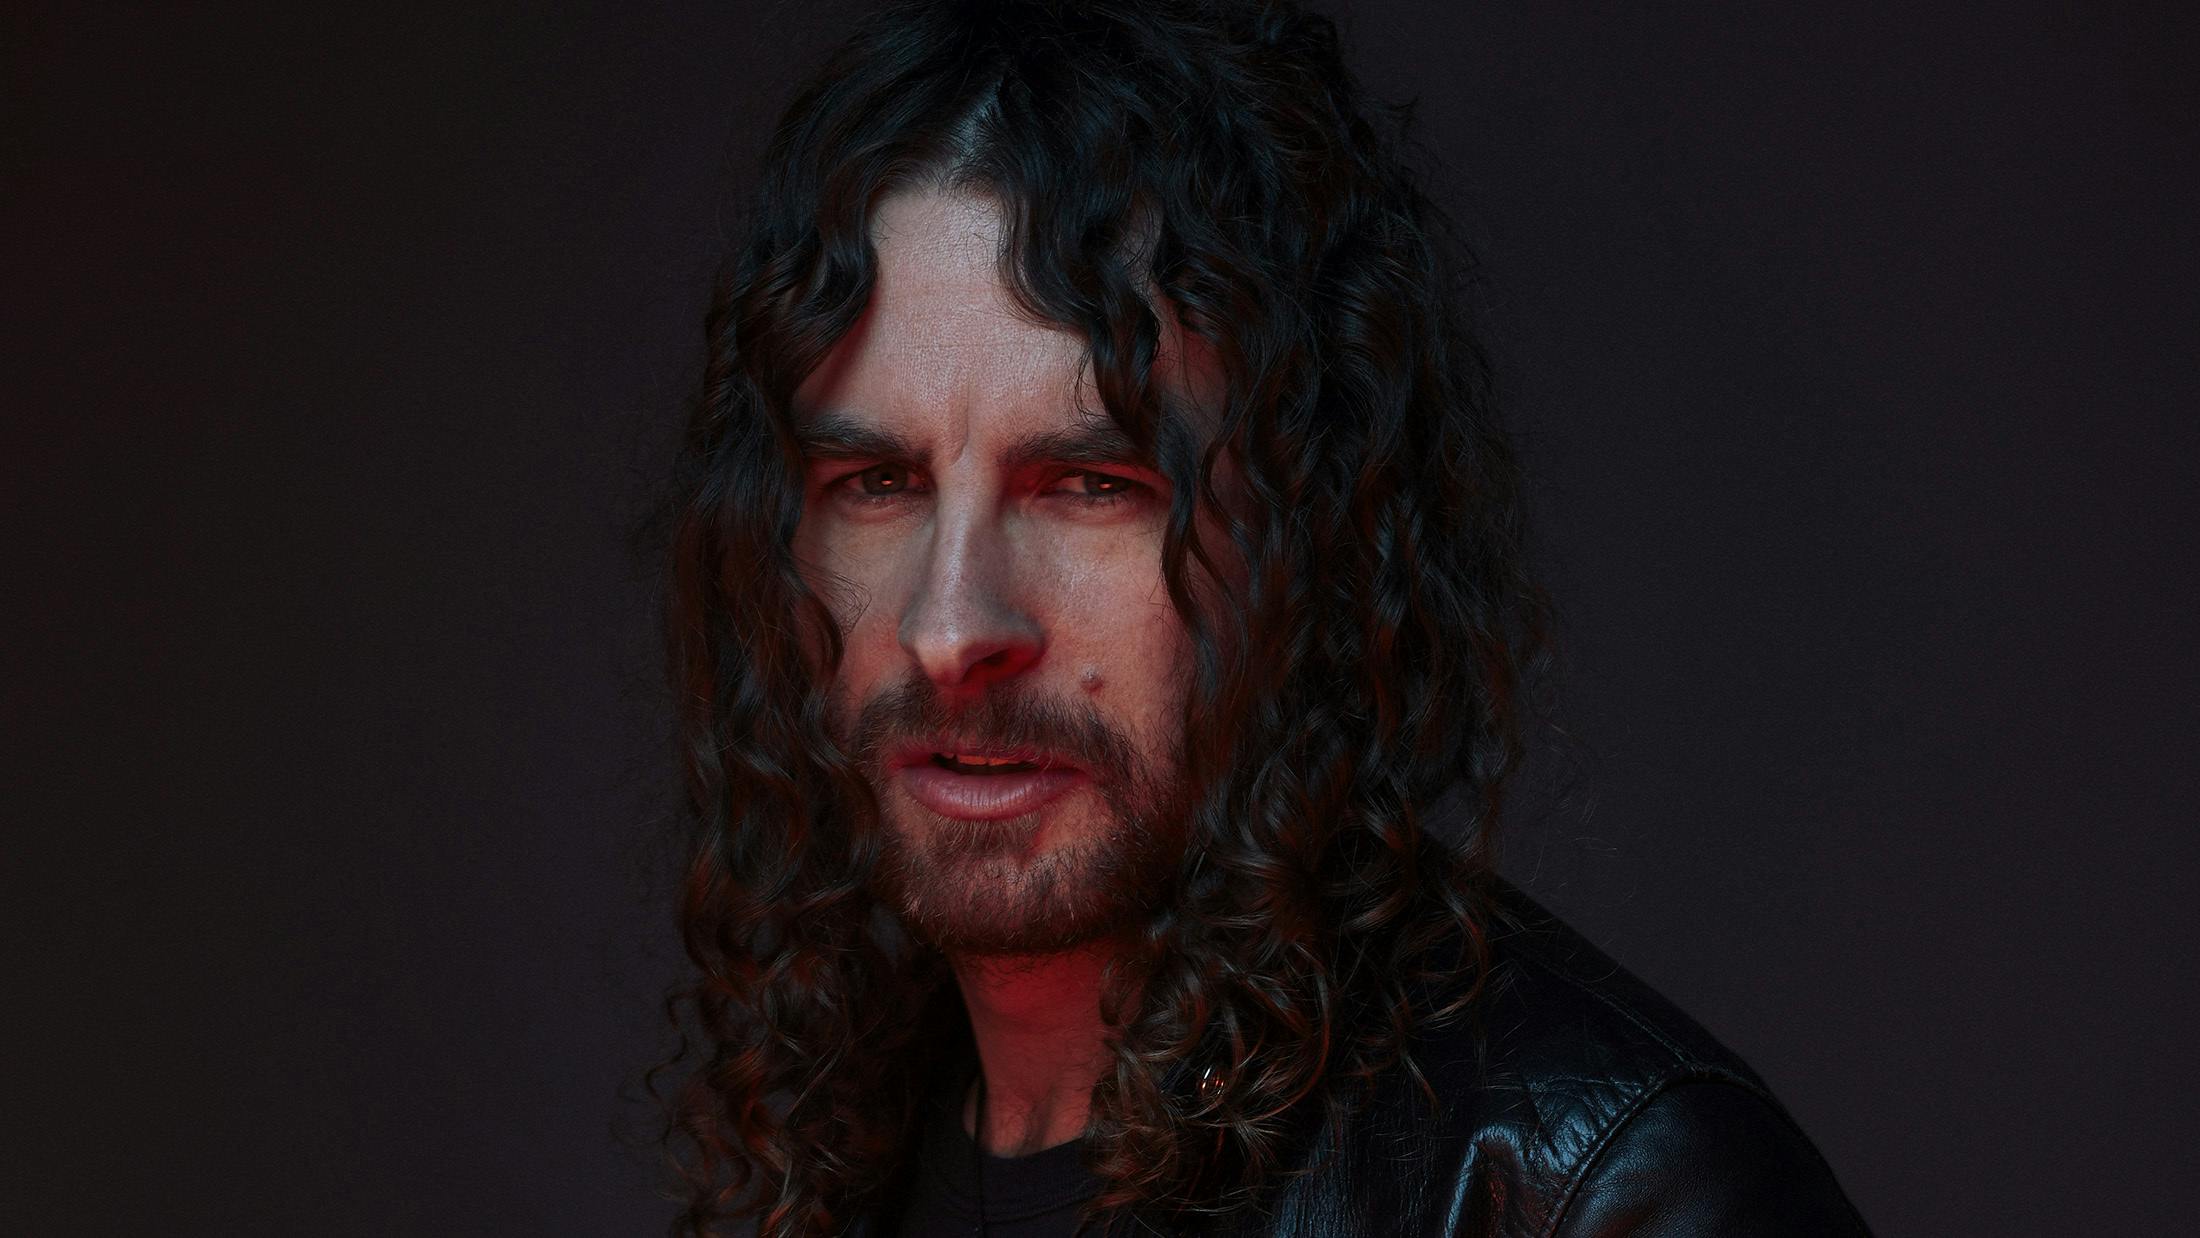 "I Don't Think You Die... Your Consciousness Moves On To Something Else": 13 Questions With Joel O'Keeffe From Airbourne